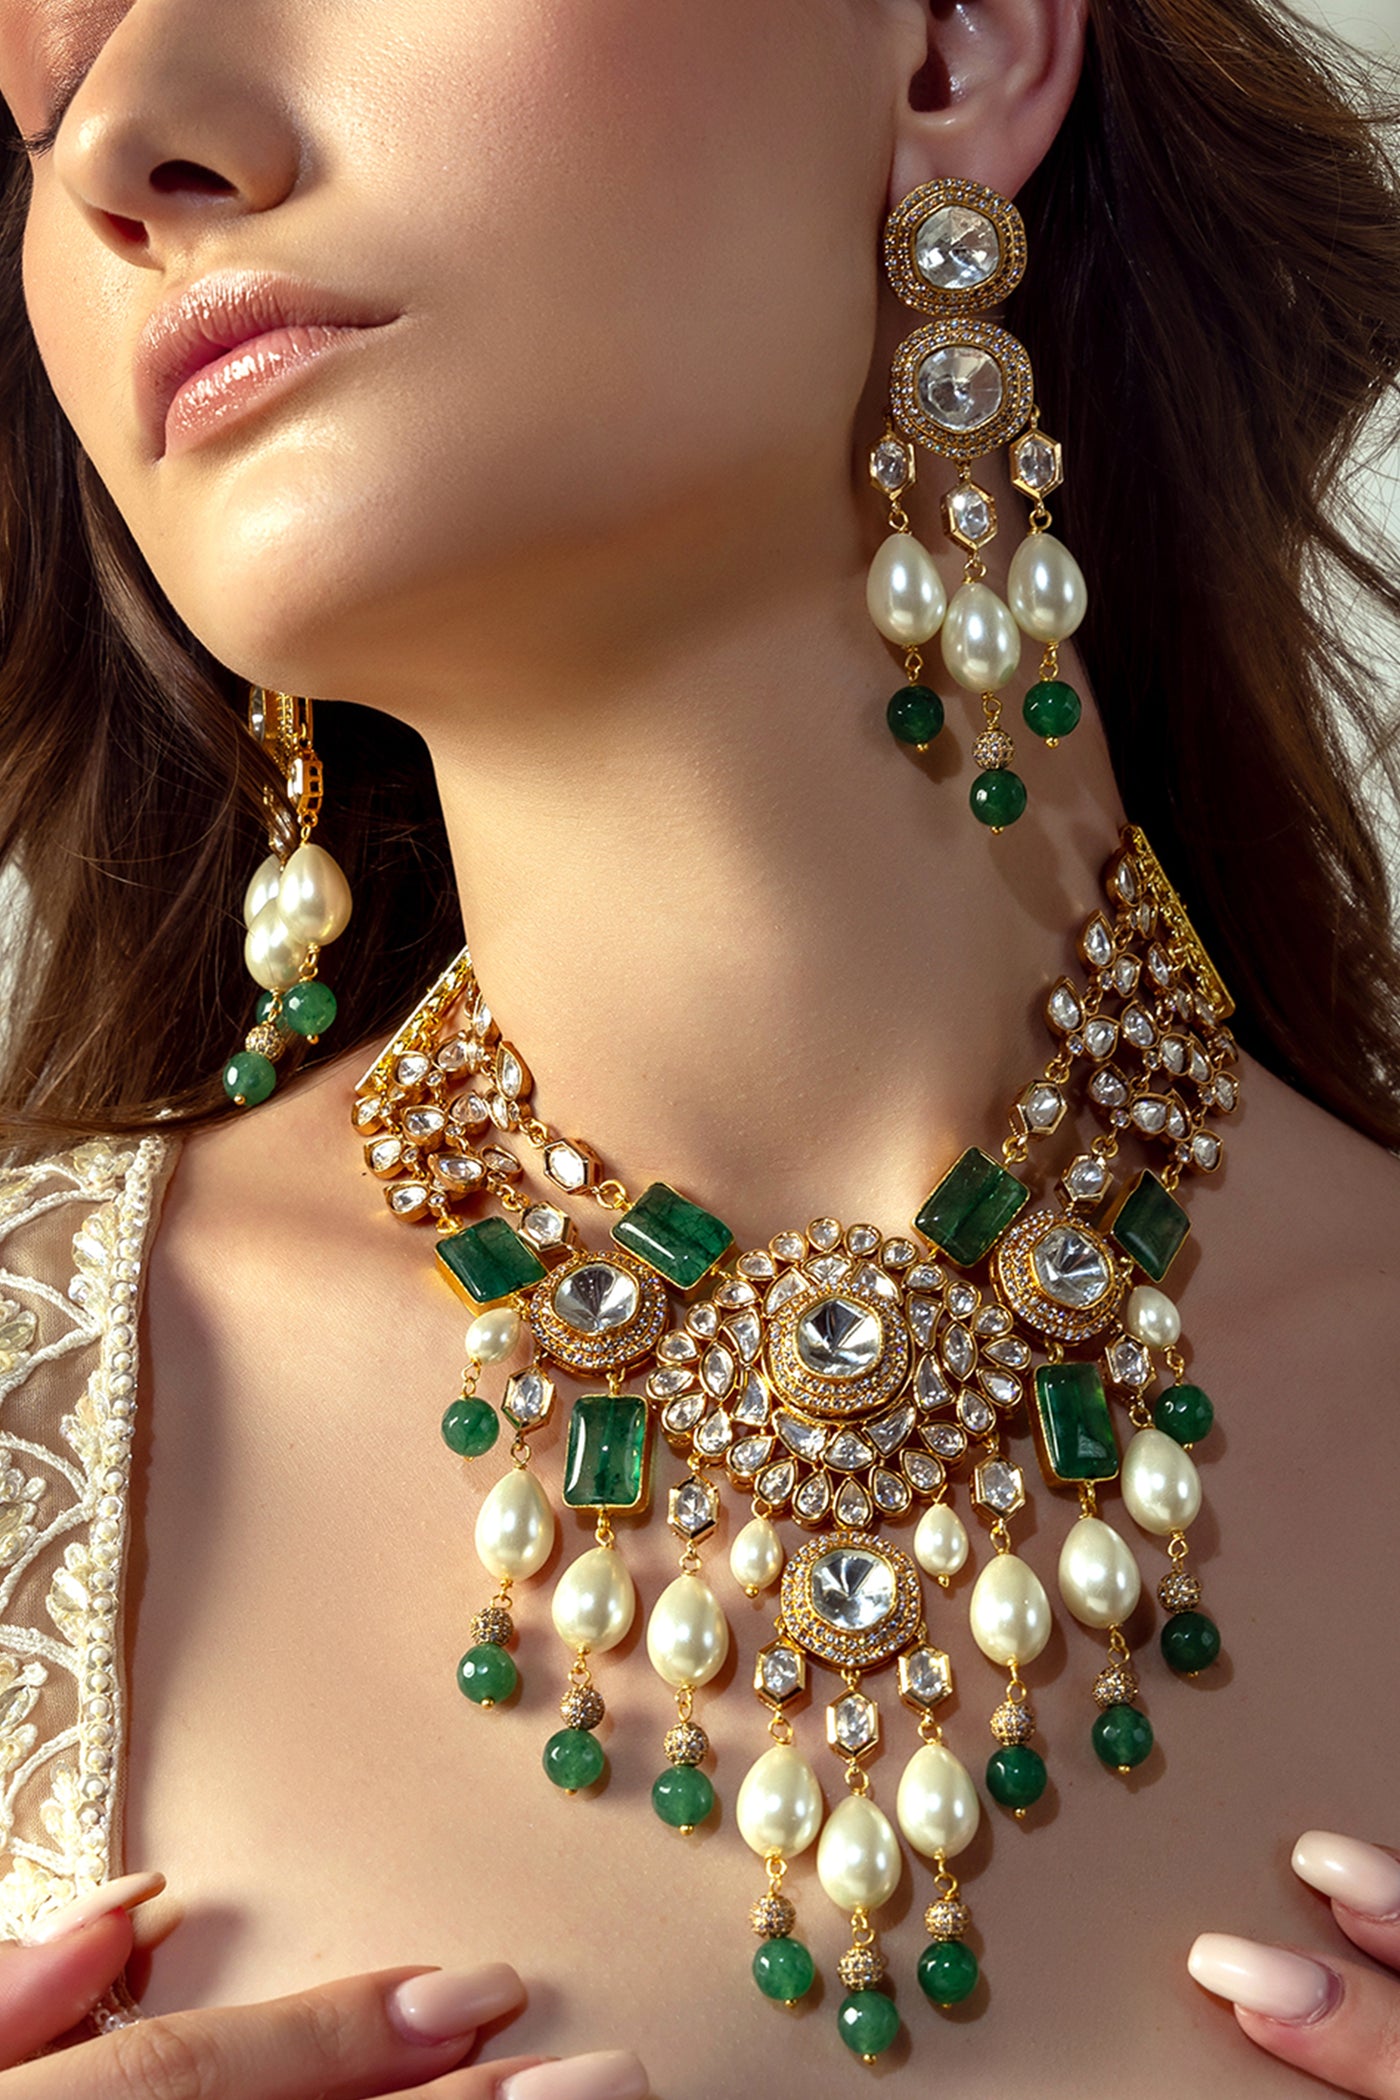 Joules by Radhika Bridal Necklace Set With Green Jades And Pearls jewellery indian designer wear online shopping melange singapore